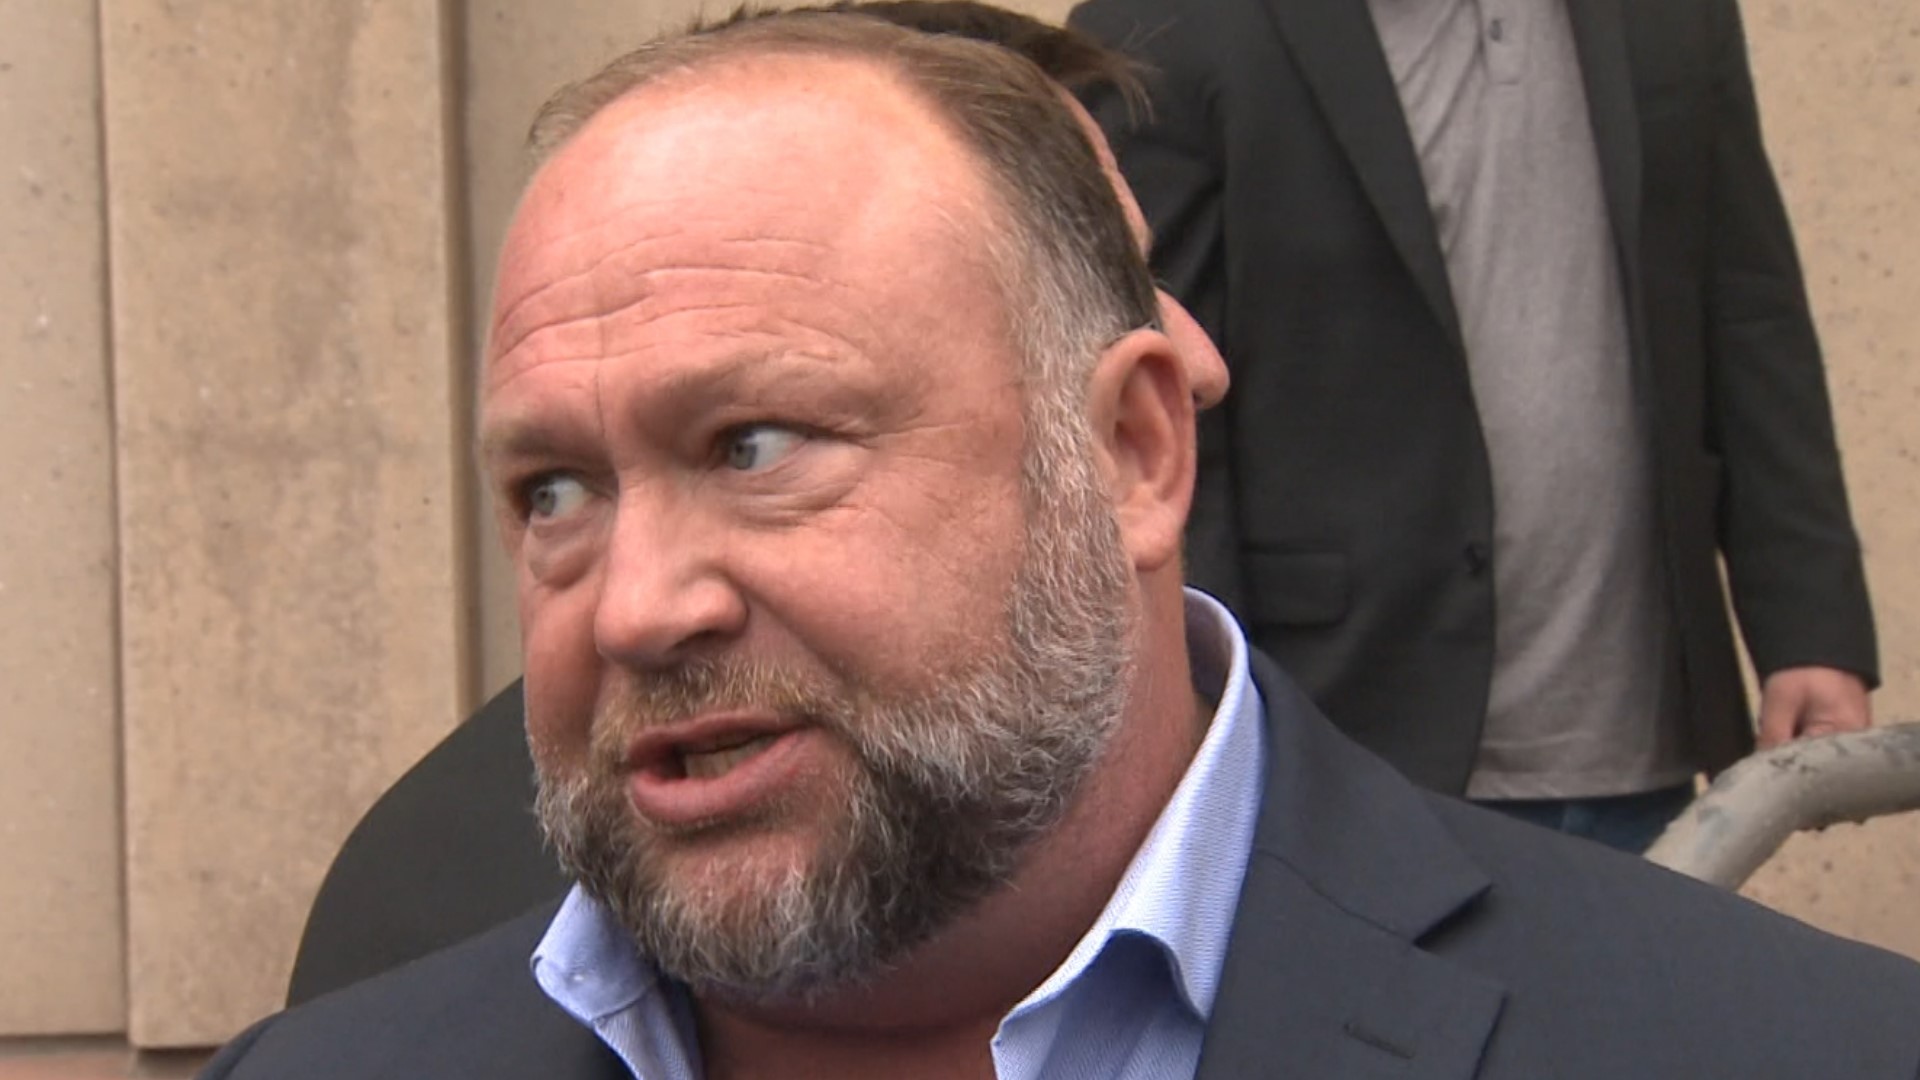 Alex Jones took the stand Thursday in a Connecticut defamation trial over his claims that the Sandy Hook shooting was a hoax.